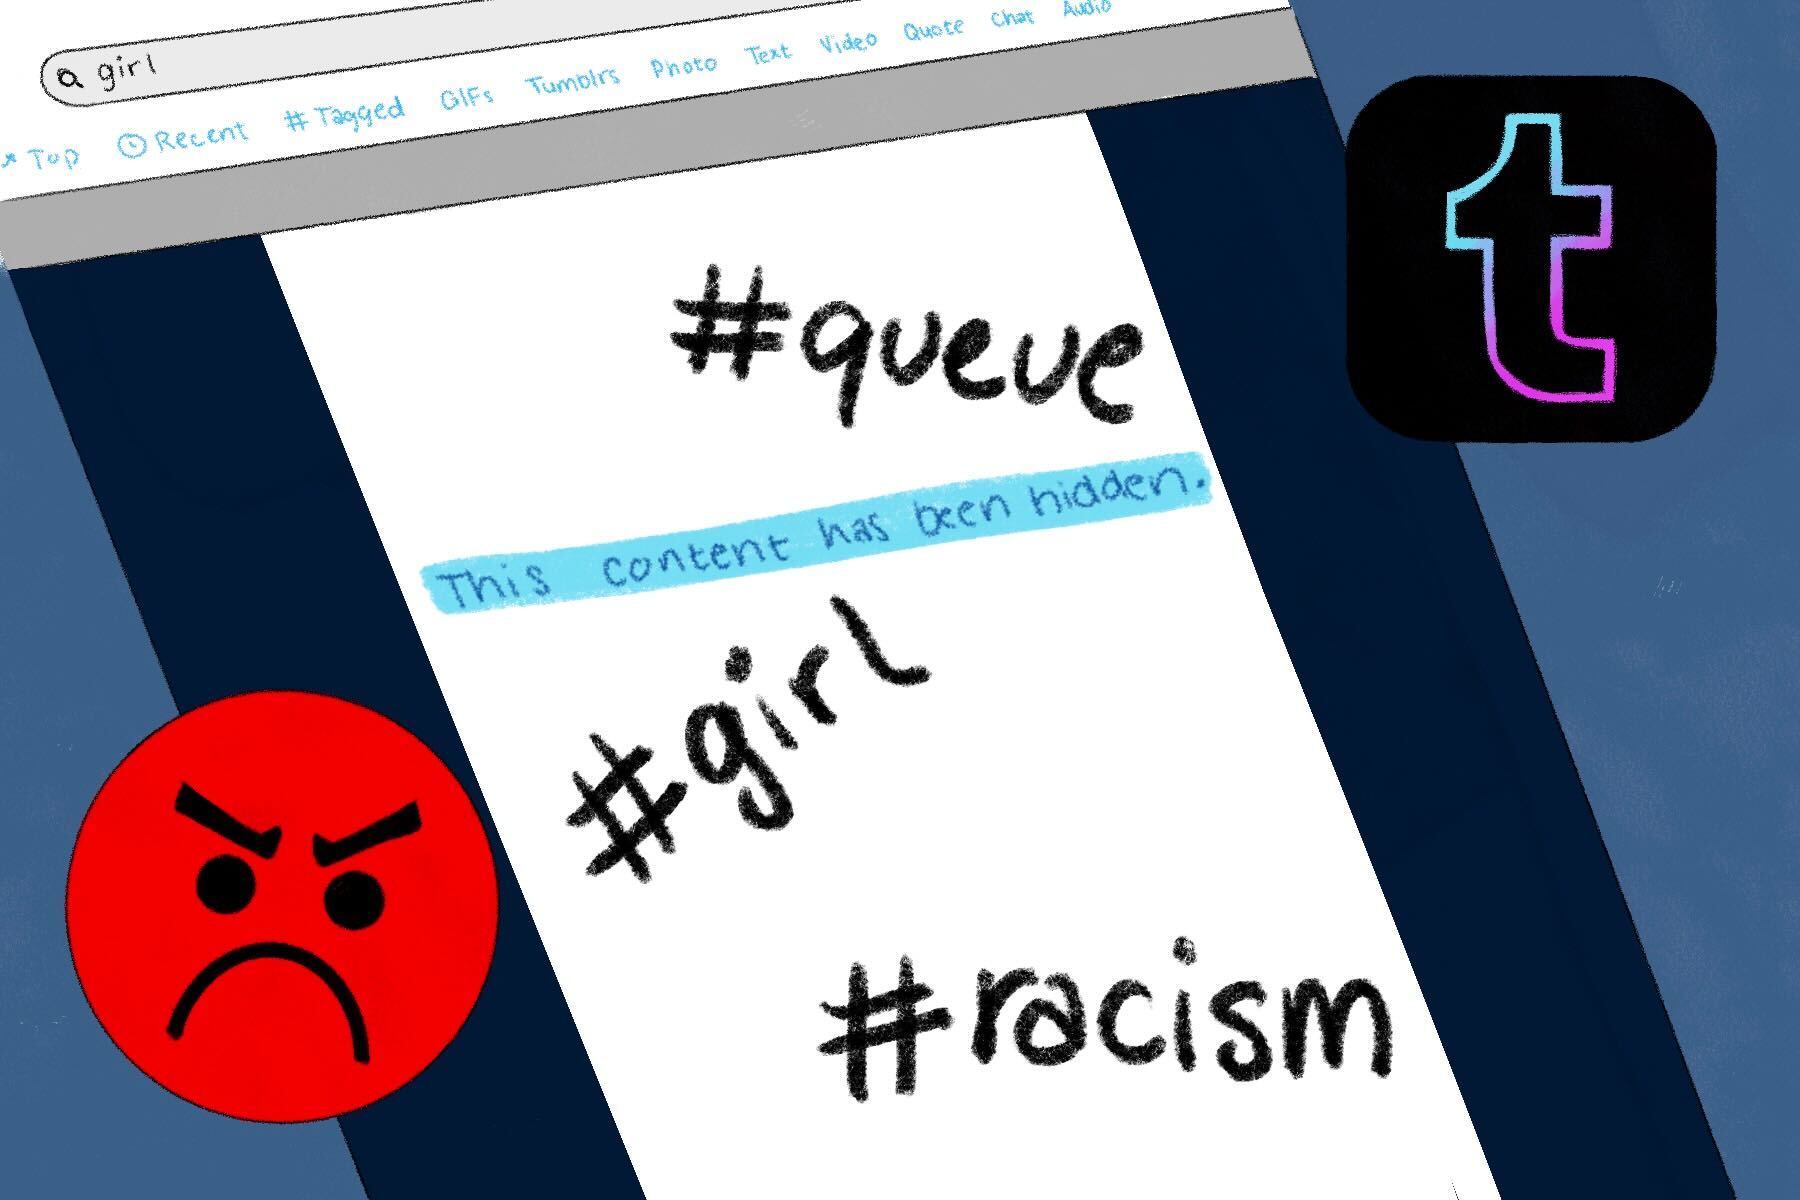 Illustration of a phone with the hashtags "queue," "girl," and "racism" written on it, as well as an angry face emoji and the Tumblr app icon to the sides.